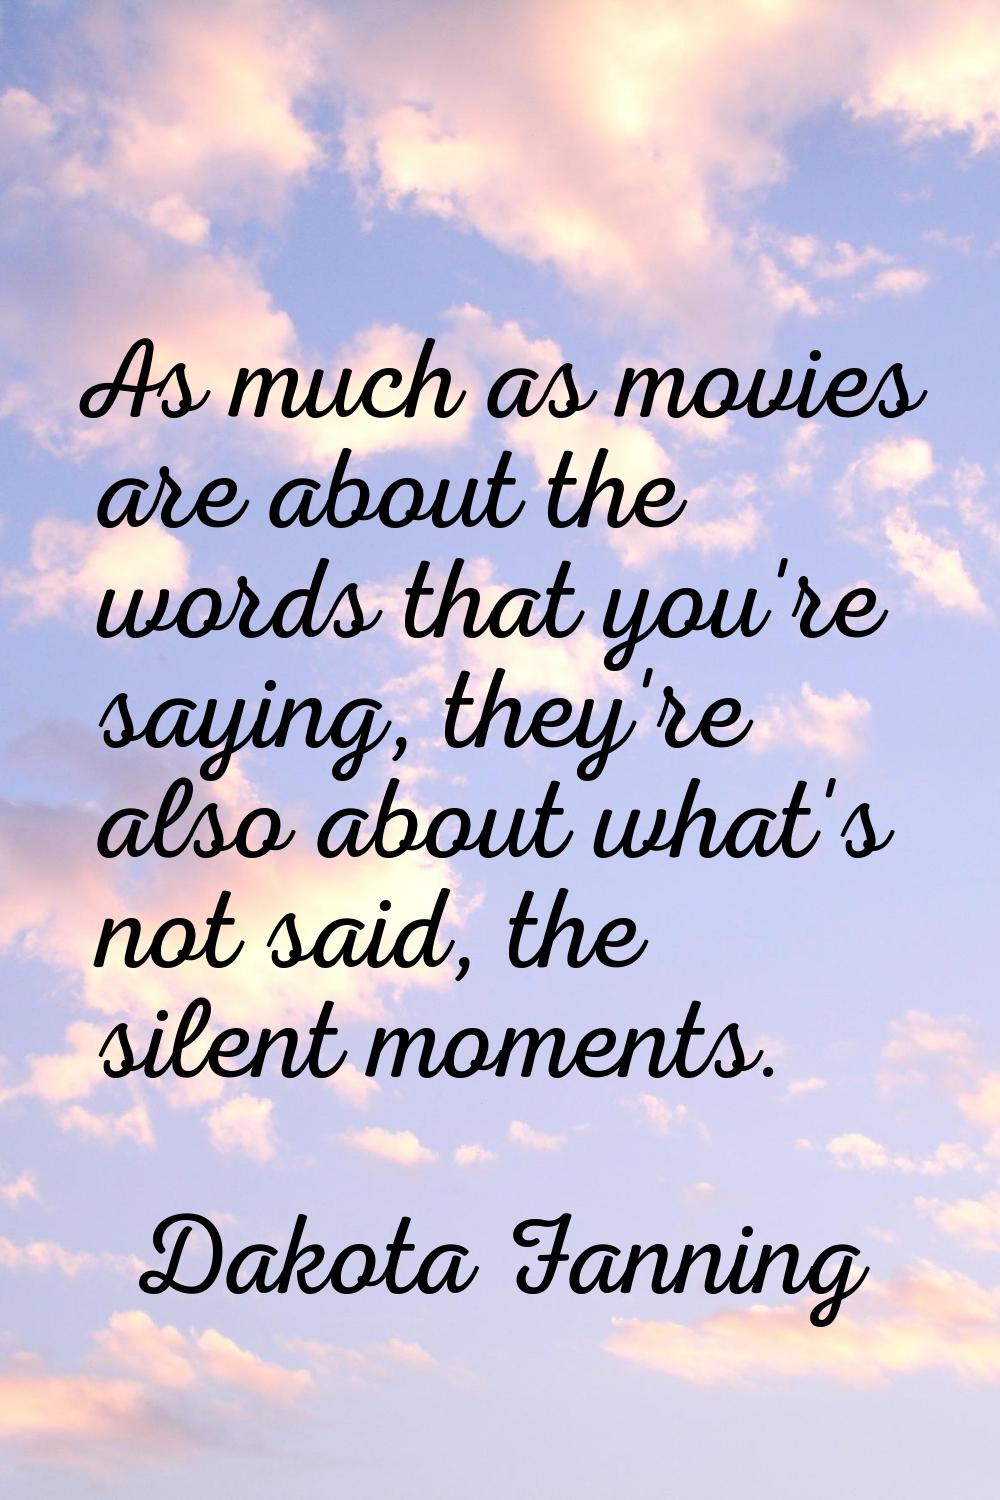 As much as movies are about the words that you're saying, they're also about what's not said, the s